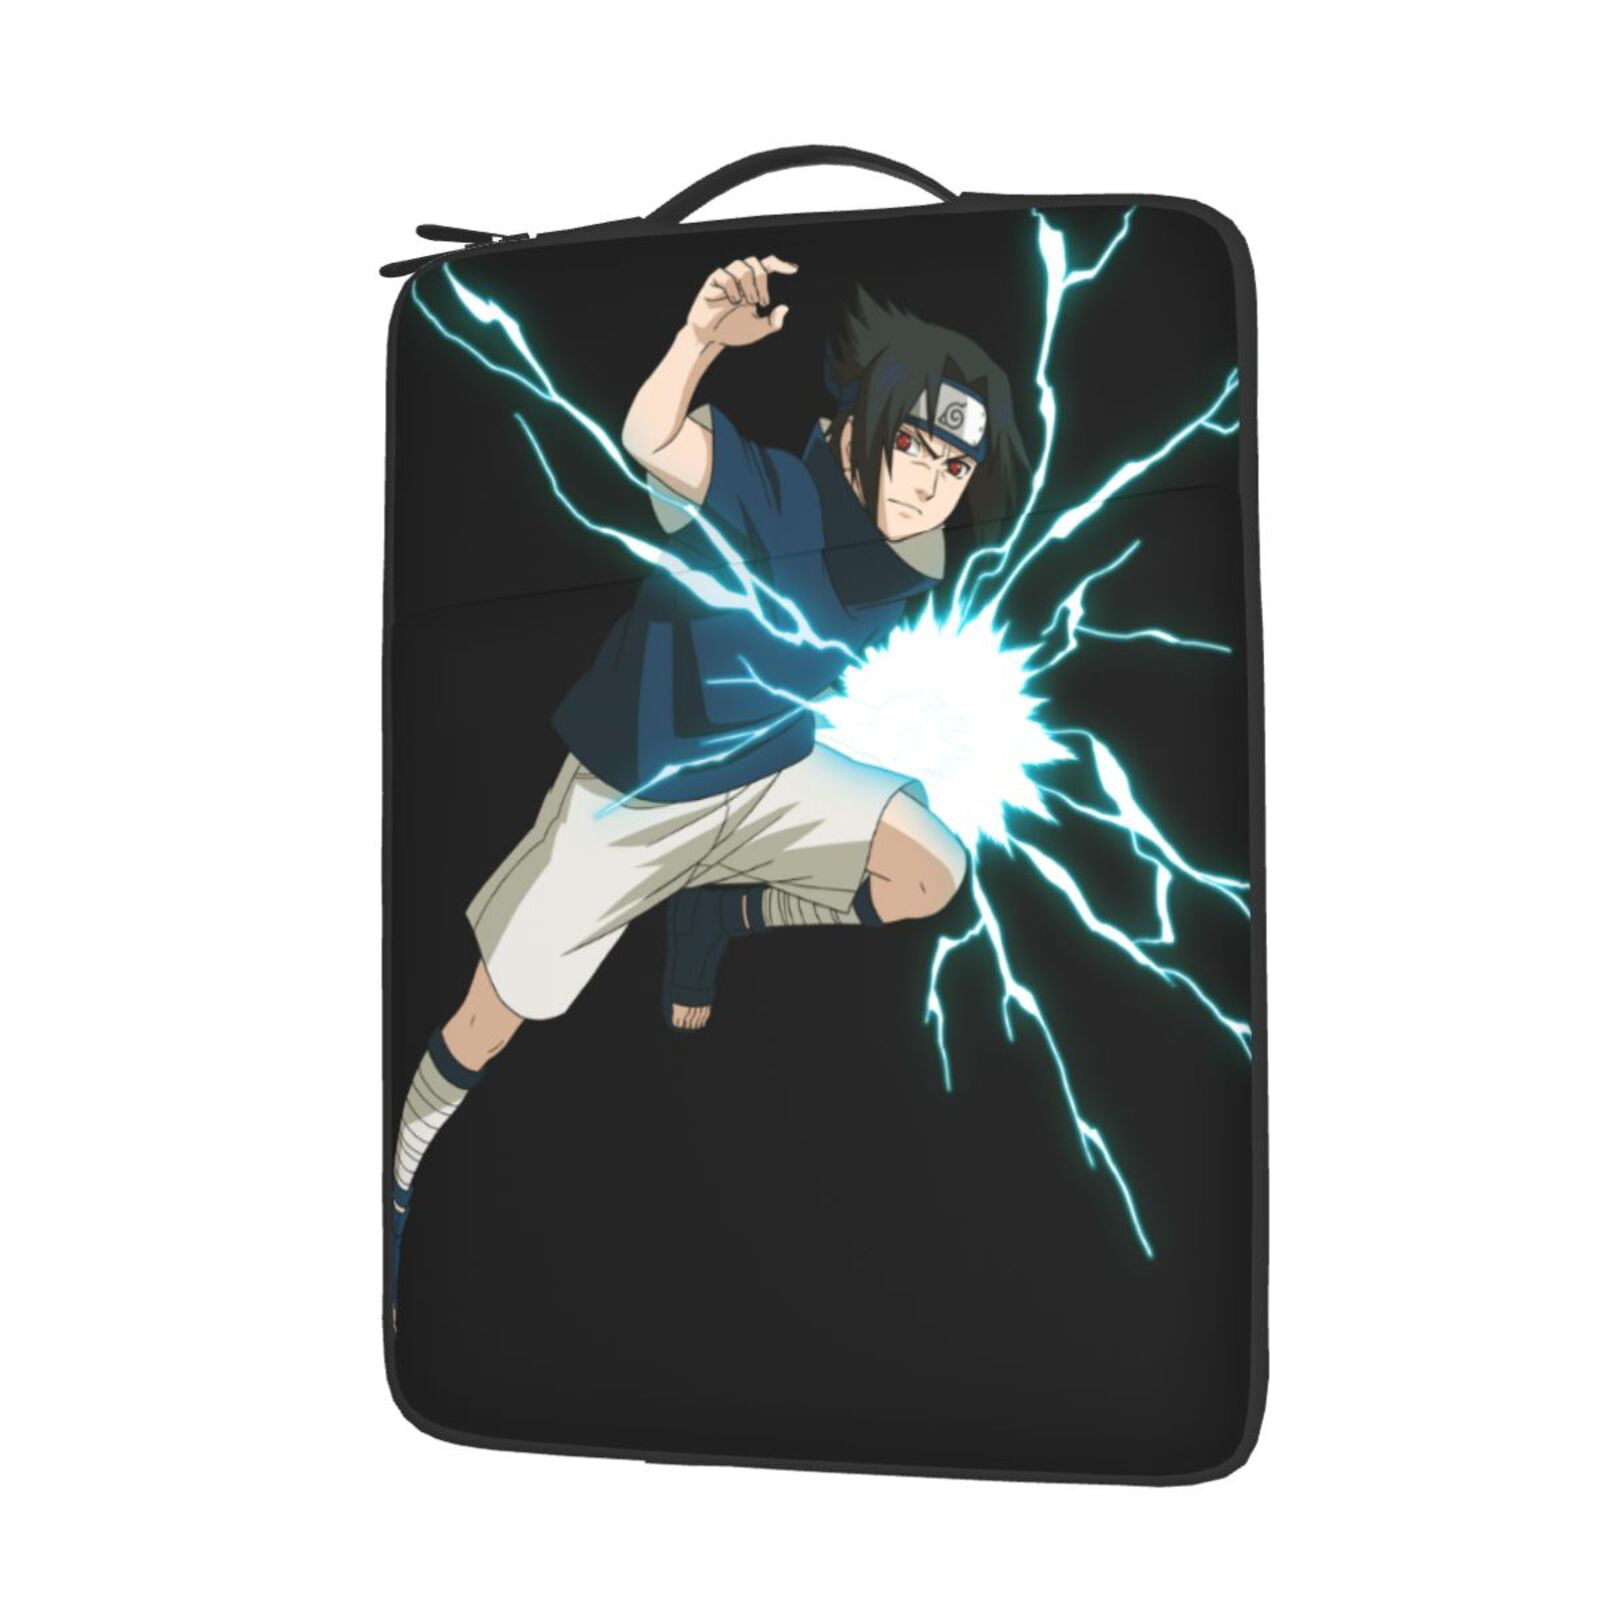 Anime Naruto 13-Inch to 15-Inch Laptop Sleeve Case Waterproof Notebook Computer Bag-Light and Comfortable Tablet Briefcase-Band Zipper Portable Handbag